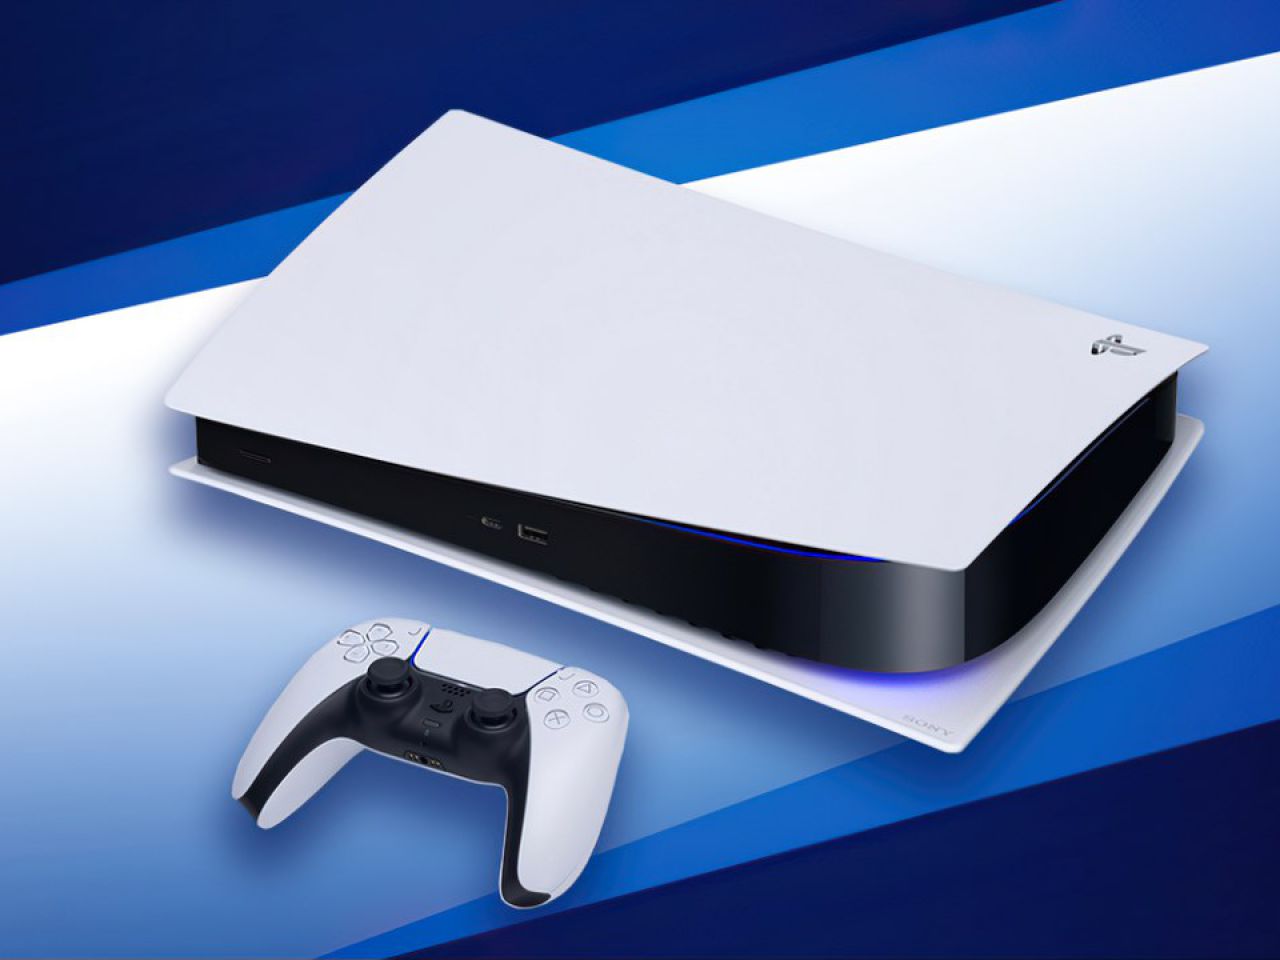 8 Most Useful Ways to Boost the Performance of Your PS4